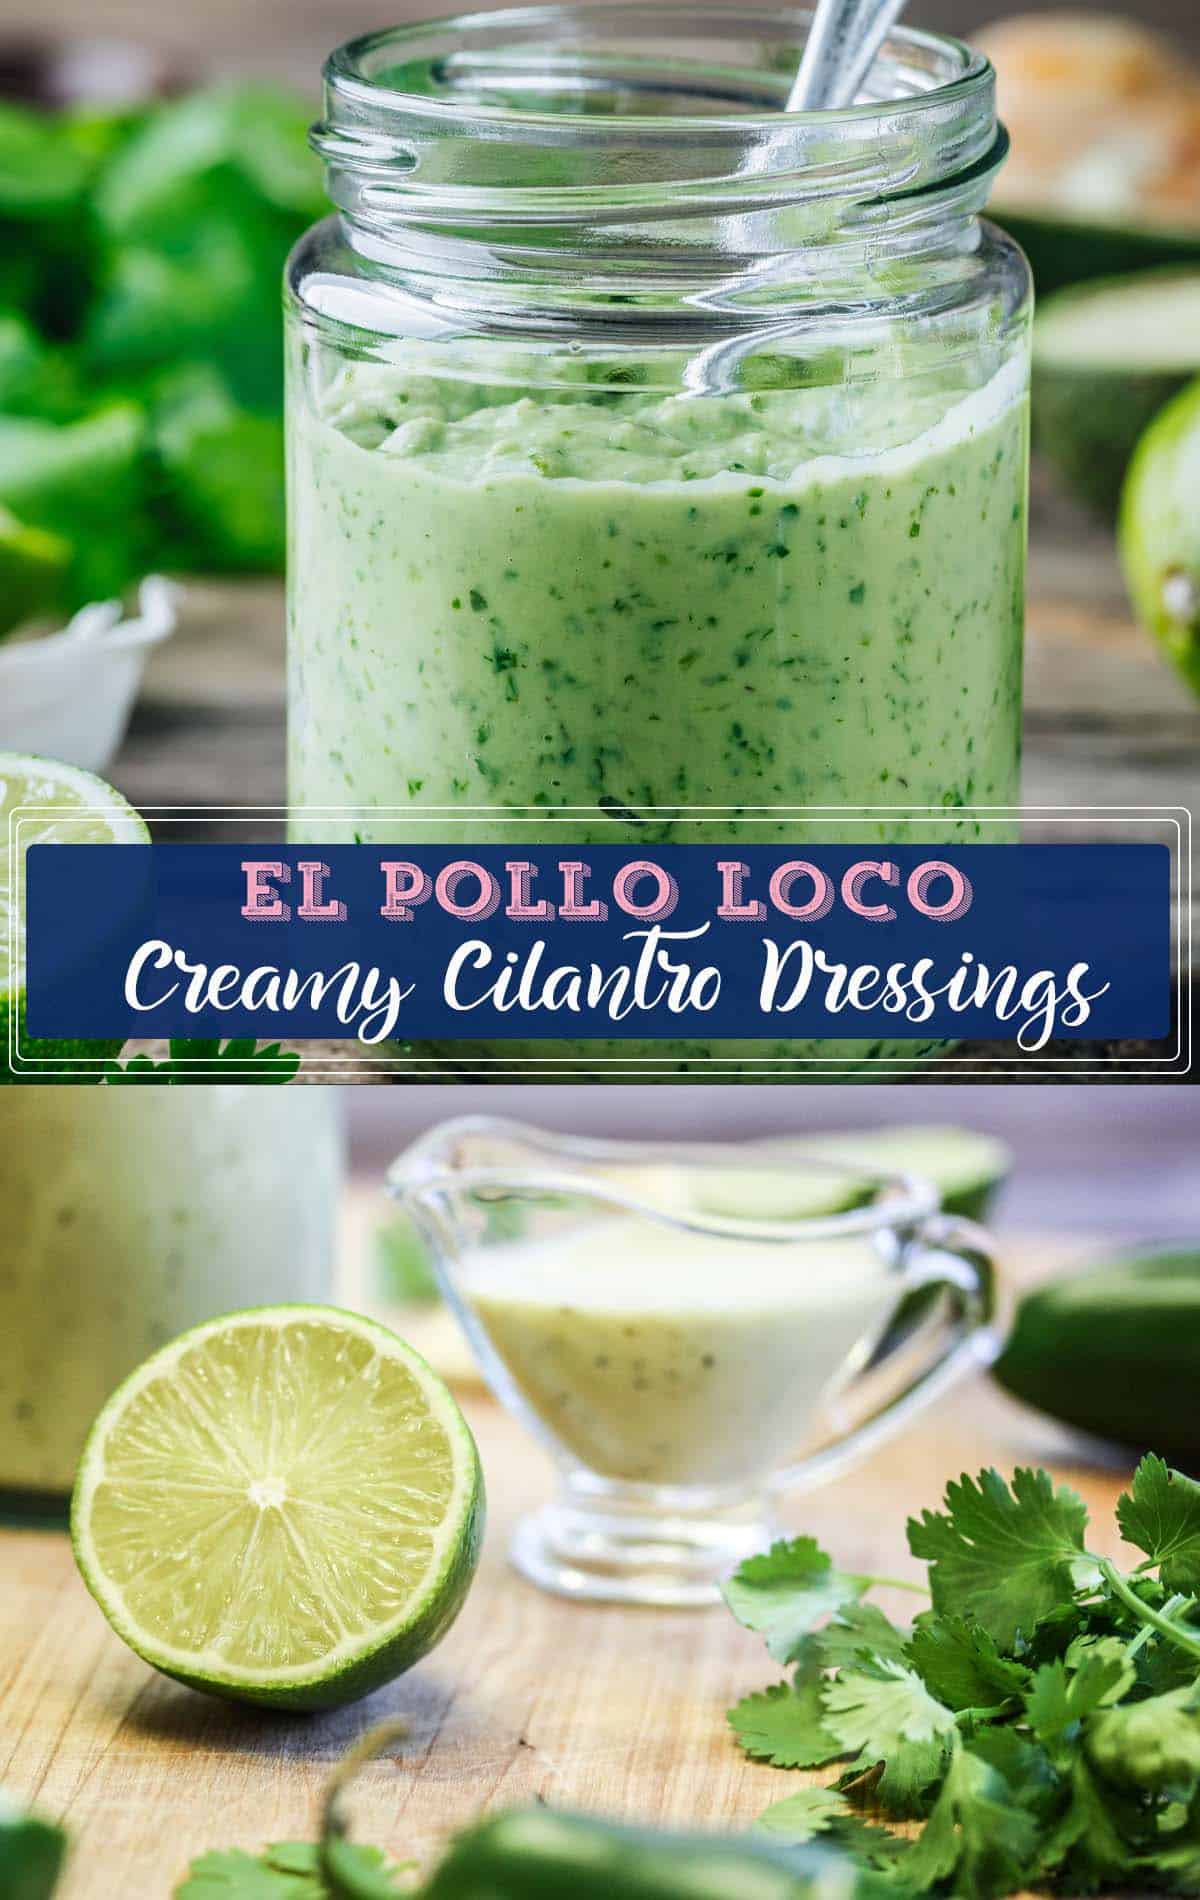 Creamy cilantro dressing" is a flavorful, easy-to-make dressing that uniquely tastes any dish. Its origins can be traced back to El Pollo Loco, and it has become a staple in many households. It can also be made with low-fat options and is a great way to incorporate fresh herbs into your diet.